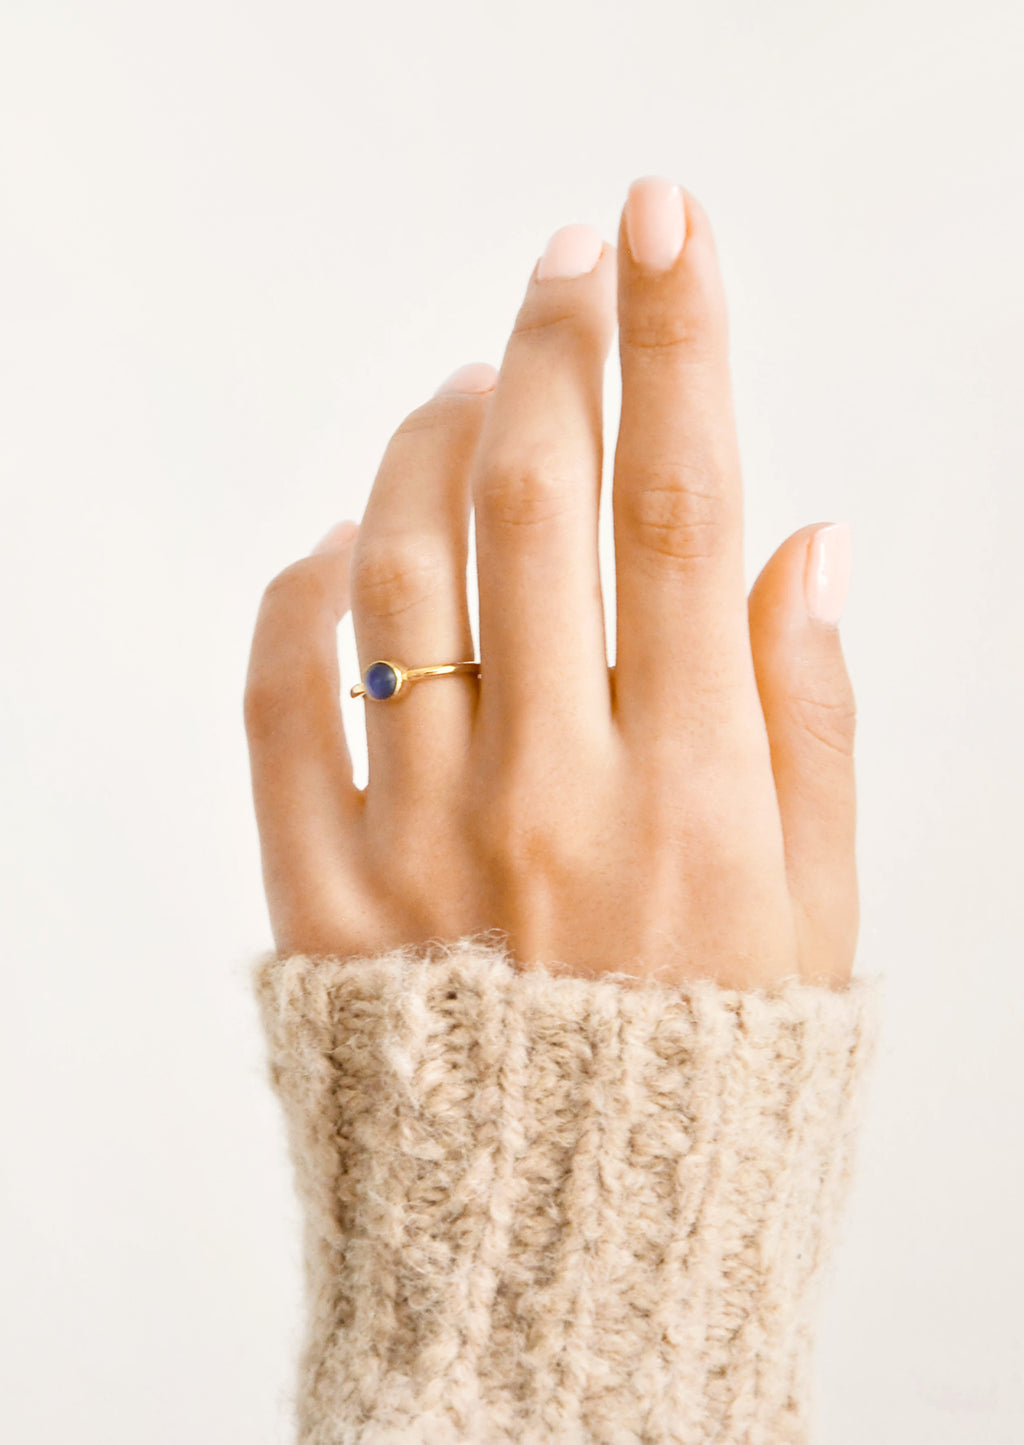 2: A woman's hand with a blue stone ring on her ring finger.